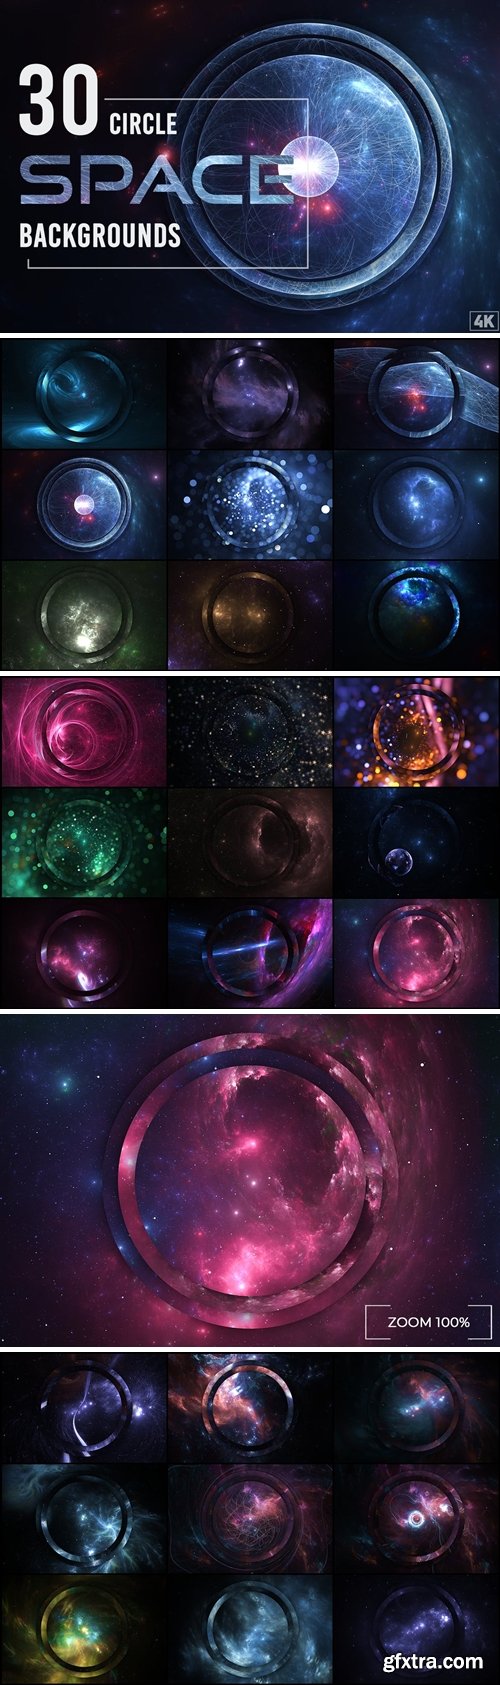 30 Abstract Circle Space Backgrounds - Vol. 1